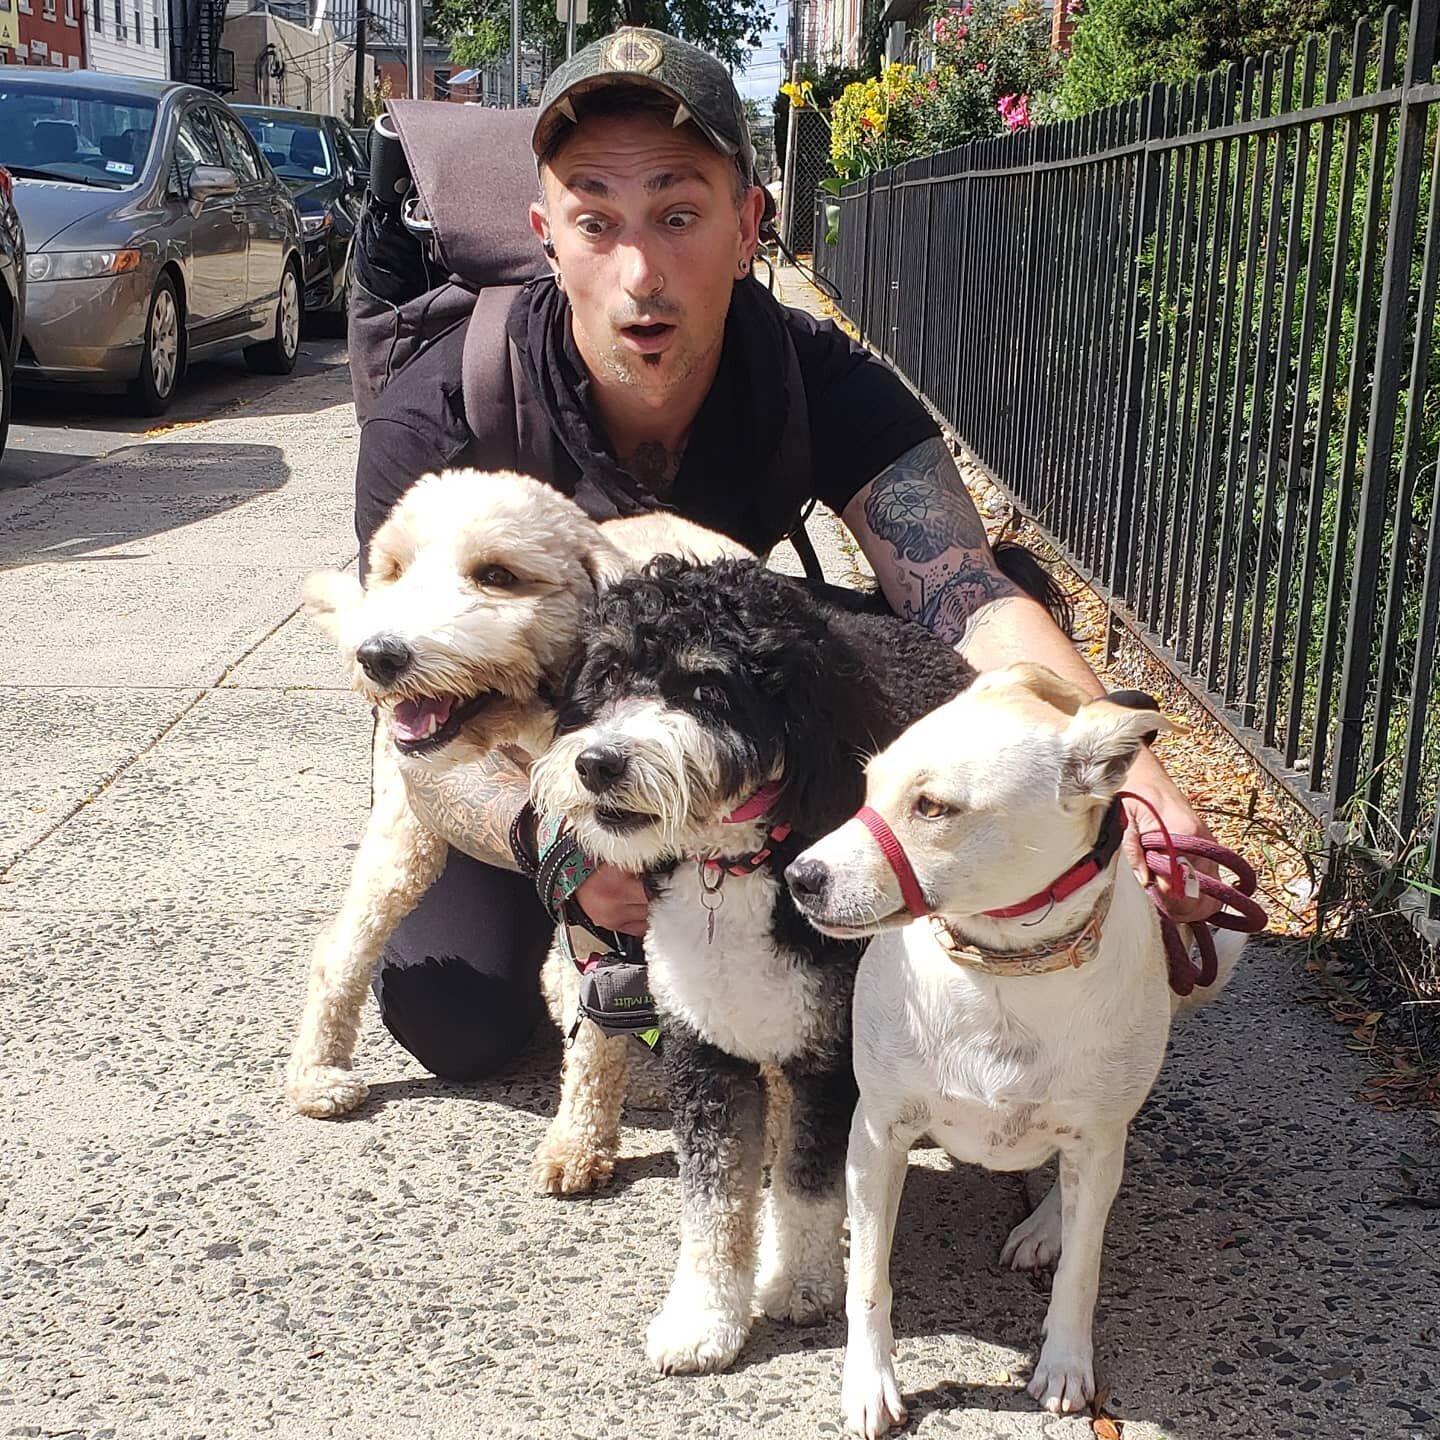 Adeline, Molly, and Molly- the &quot;Cute Cerberus&quot; that guards the entrance to frown town!!🤣🐶🌿🌷❤
#lovethesedogs #responsiblewalkers #professionalpetcare #downtownjerseycity #jerseycitypets #dogsofjc #dogsofjerseycity @dogsofhamiltonparkjc #